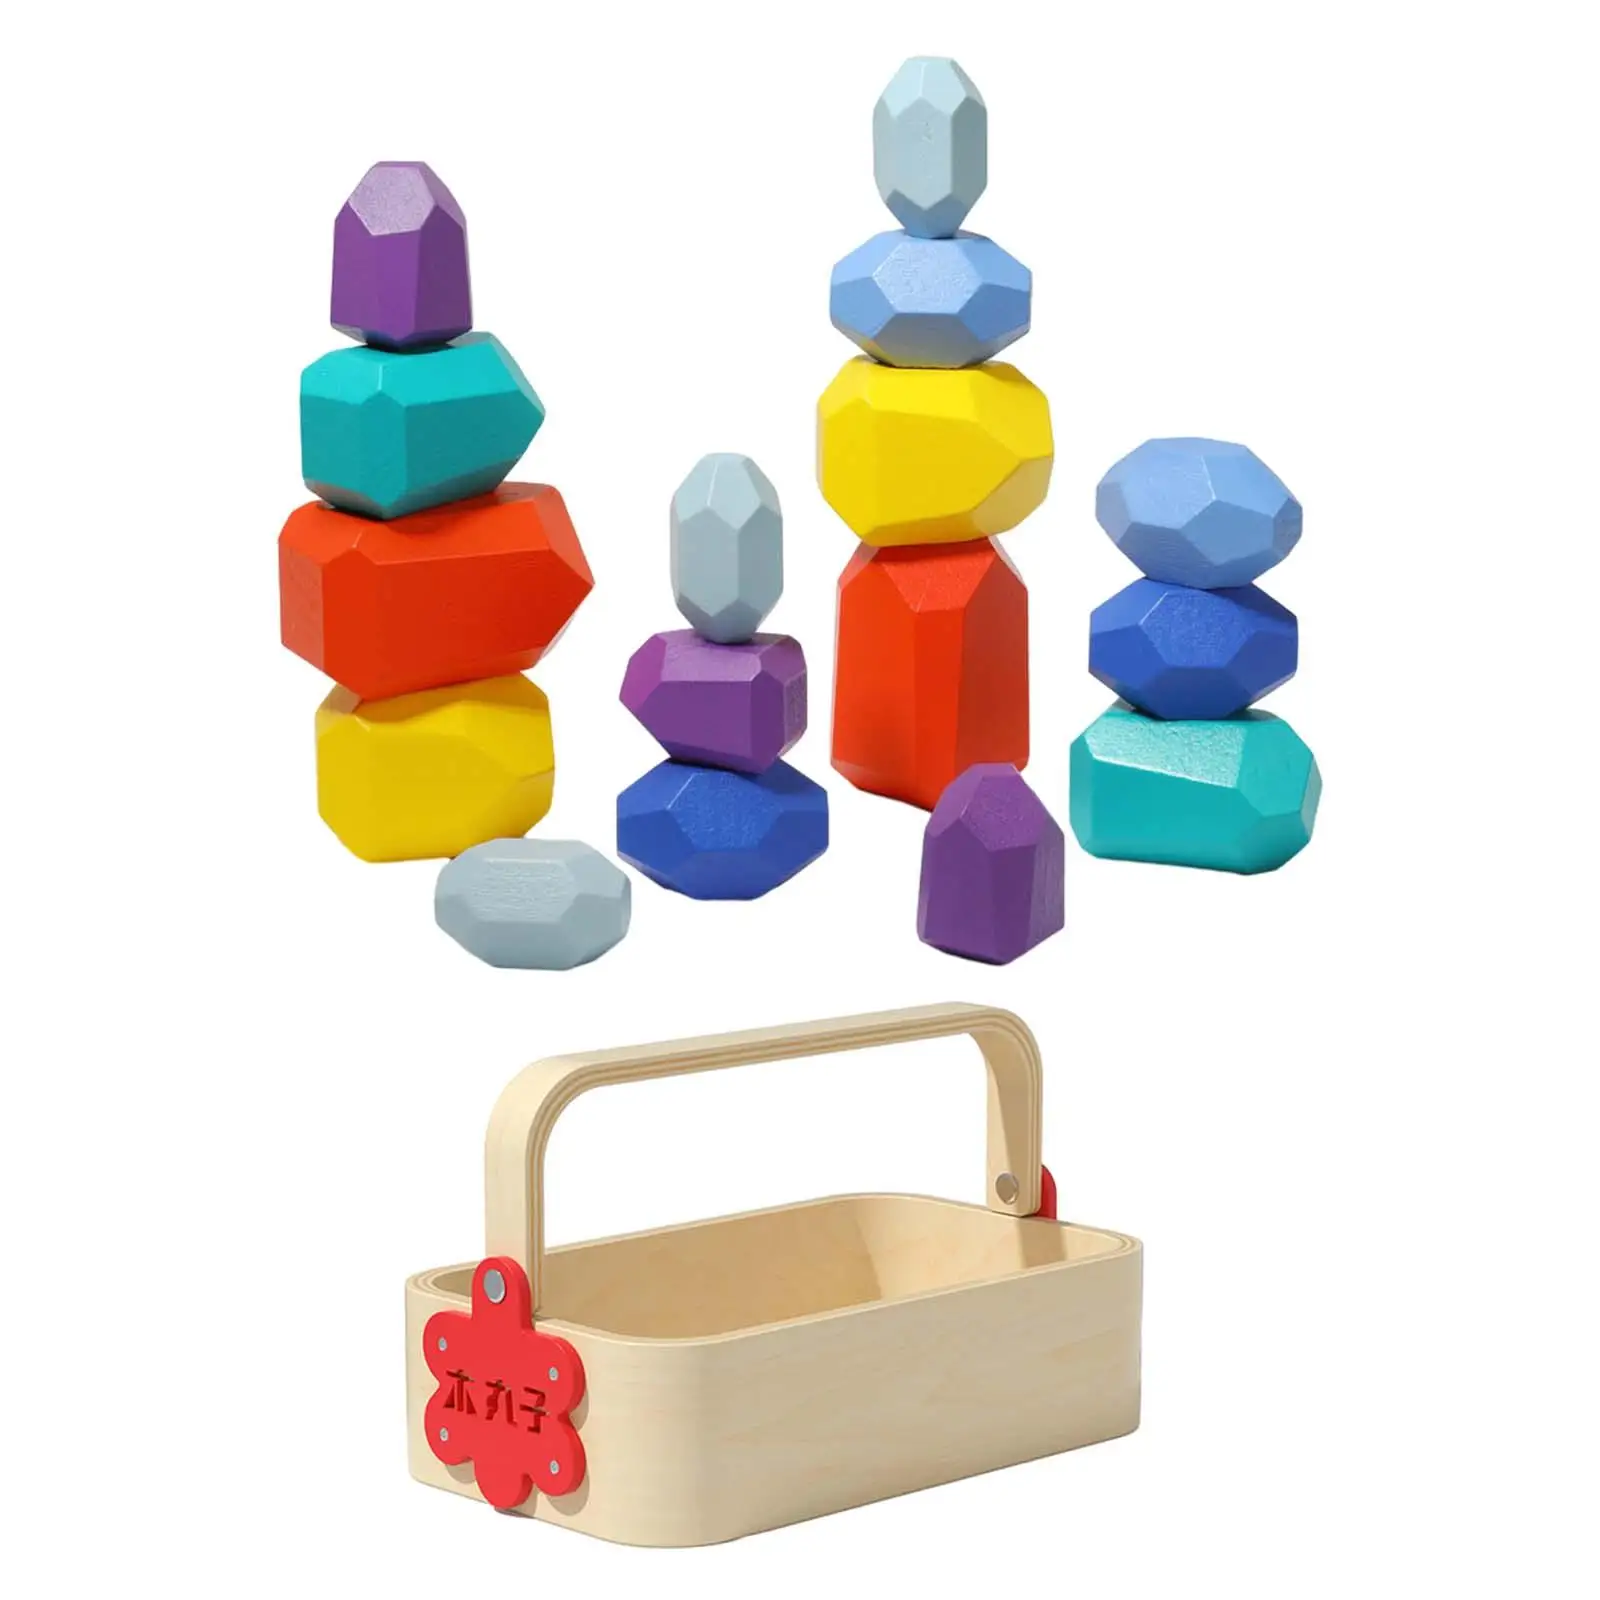 Balancing Stacking Stones Rocks Motor Skills Puzzle Toys Building Blocks for Girls Children Boys Kid 3 Years up Holiday Gifts